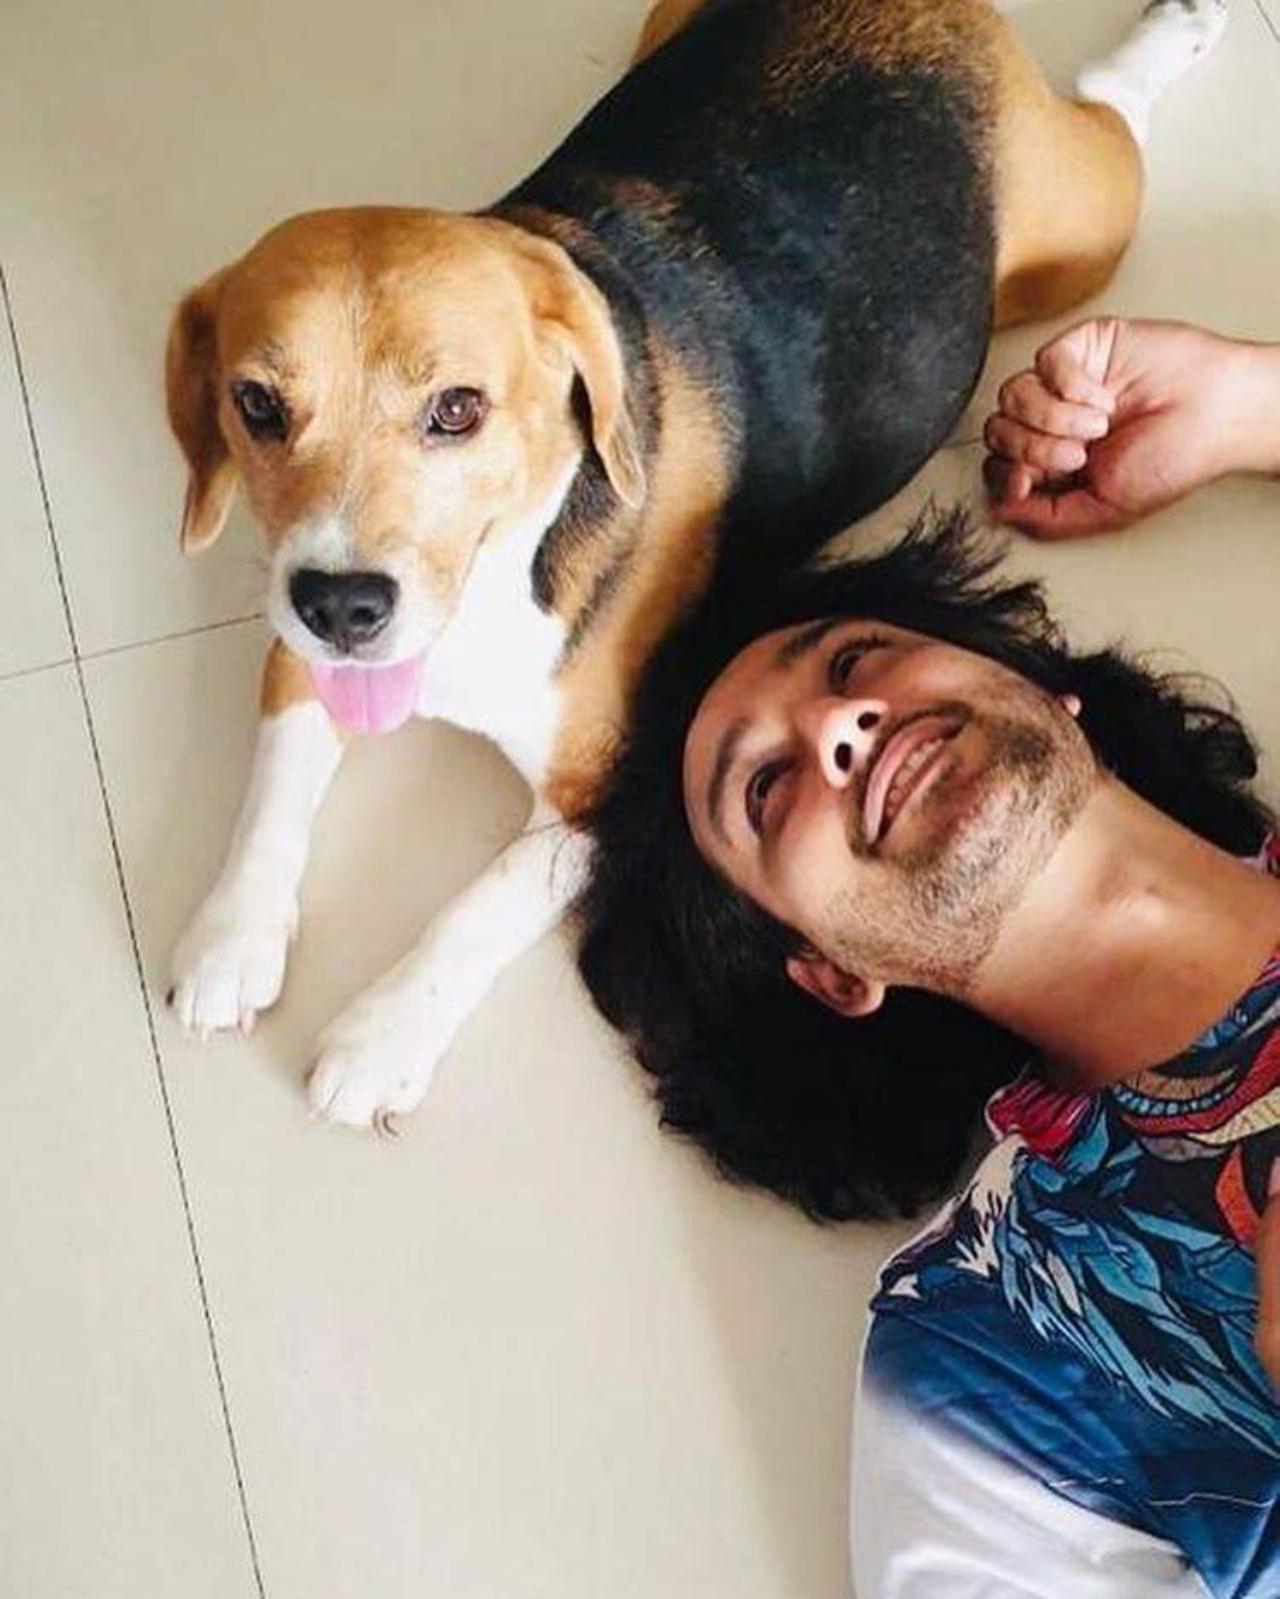 Through his experiences with different pets, Sourabh has learned the vital lesson of compassion towards all living beings, leaving a lasting impact on his perspective on empathy and care for others. It seems like the pair have a lot of fun together as seen in this picture!